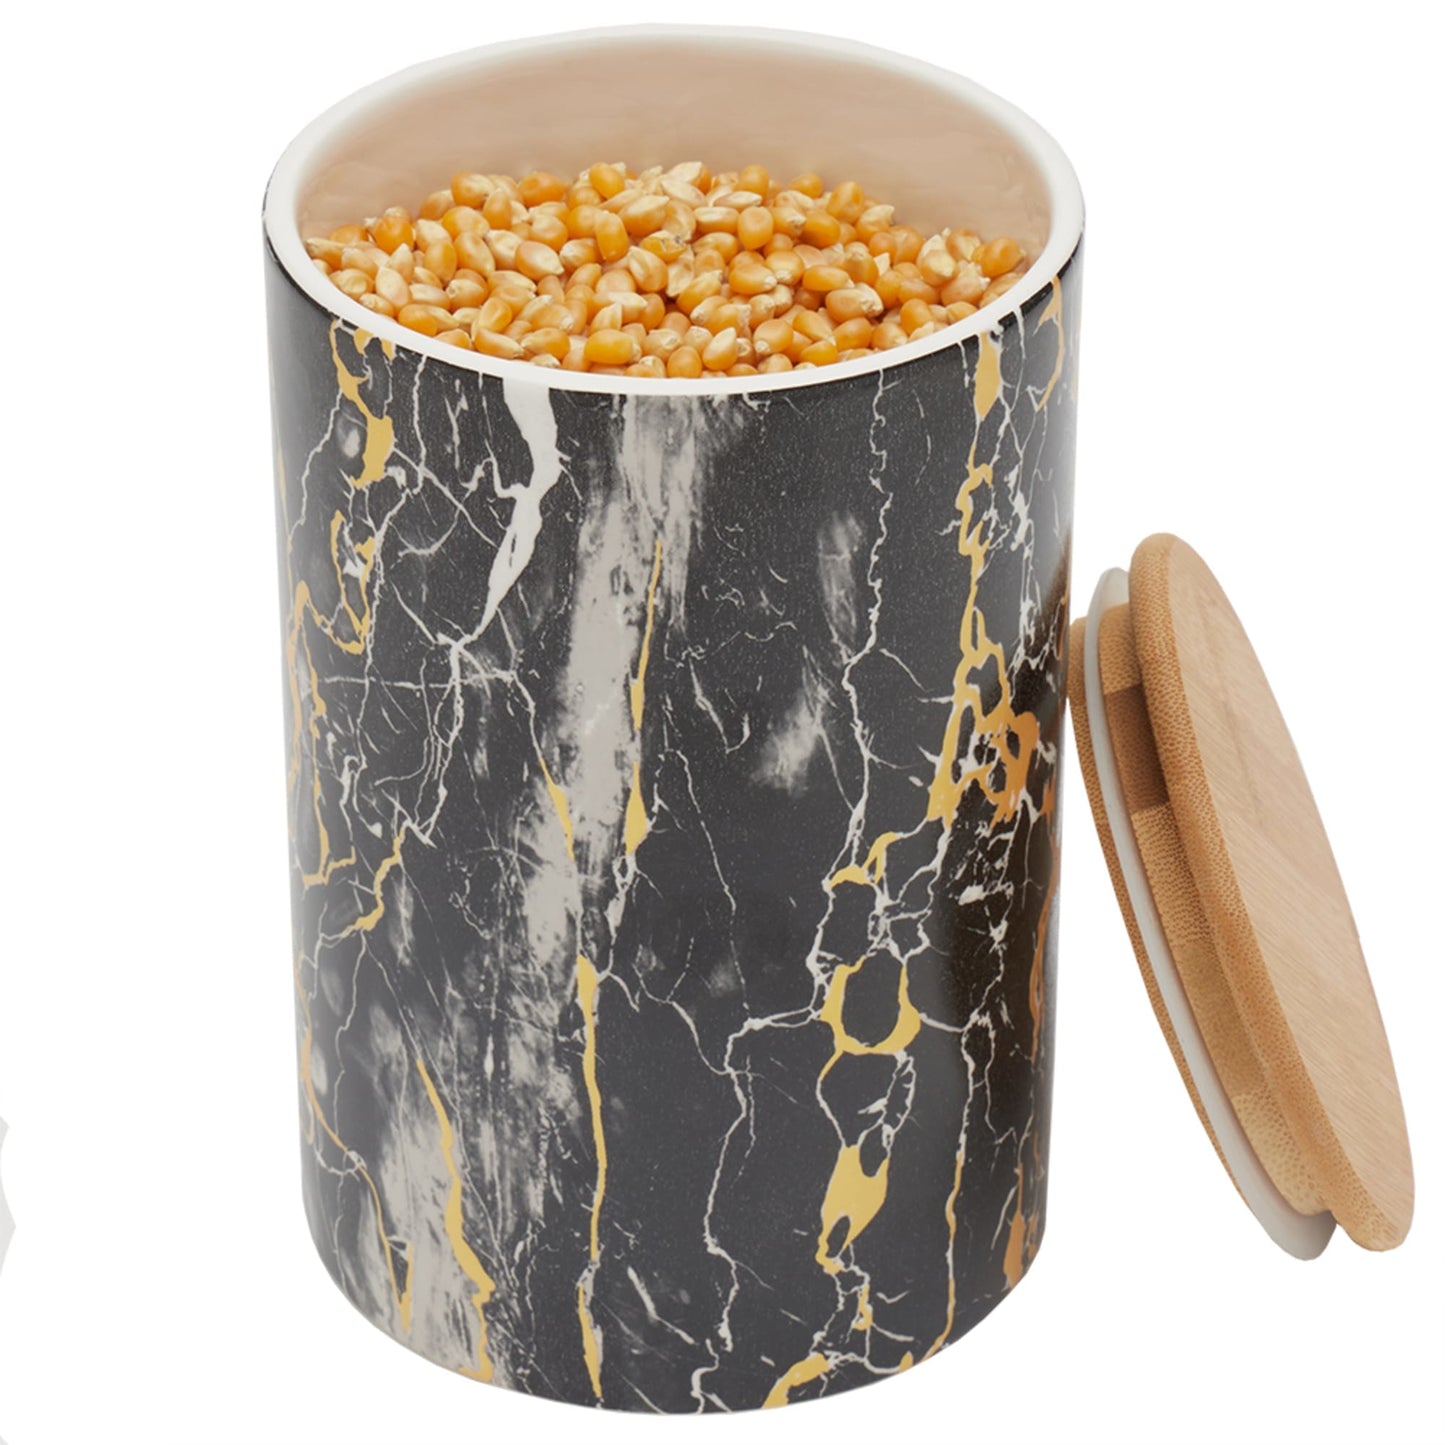 Marble Like Large Ceramic Canister with Bamboo Top, Black